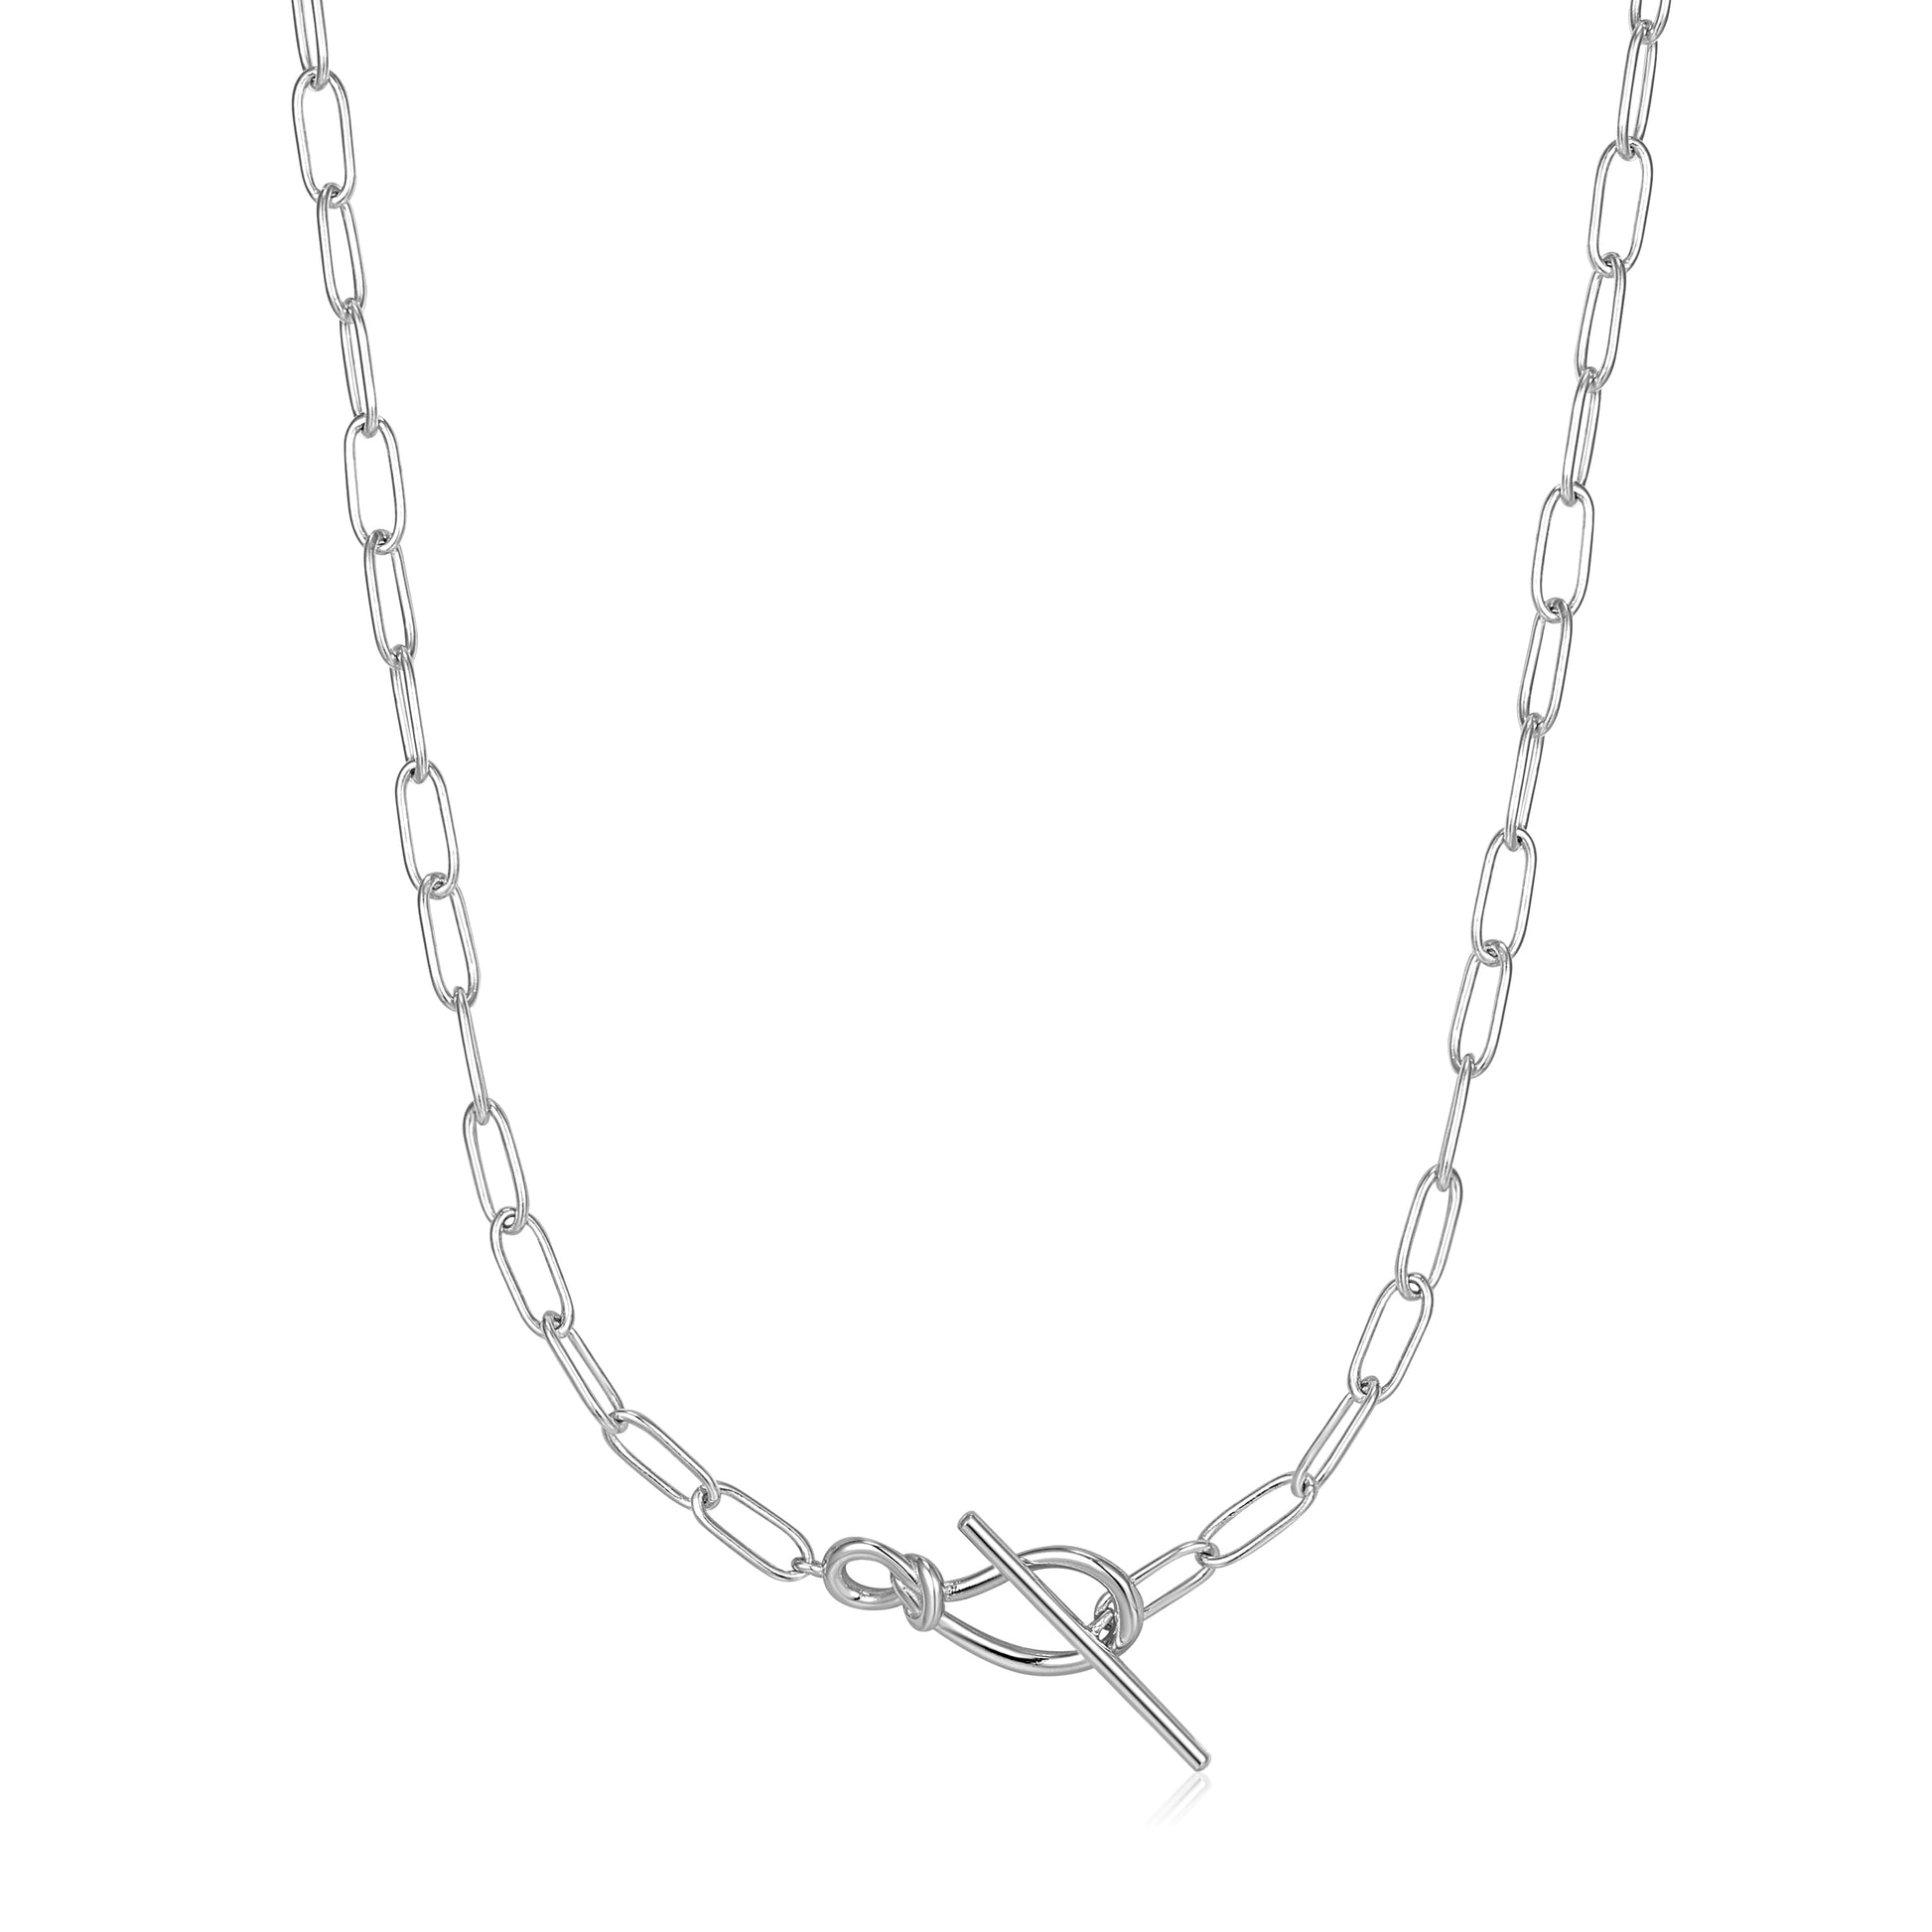 Ania Haie Knot T Bar Chain Necklace - Silver Necklace